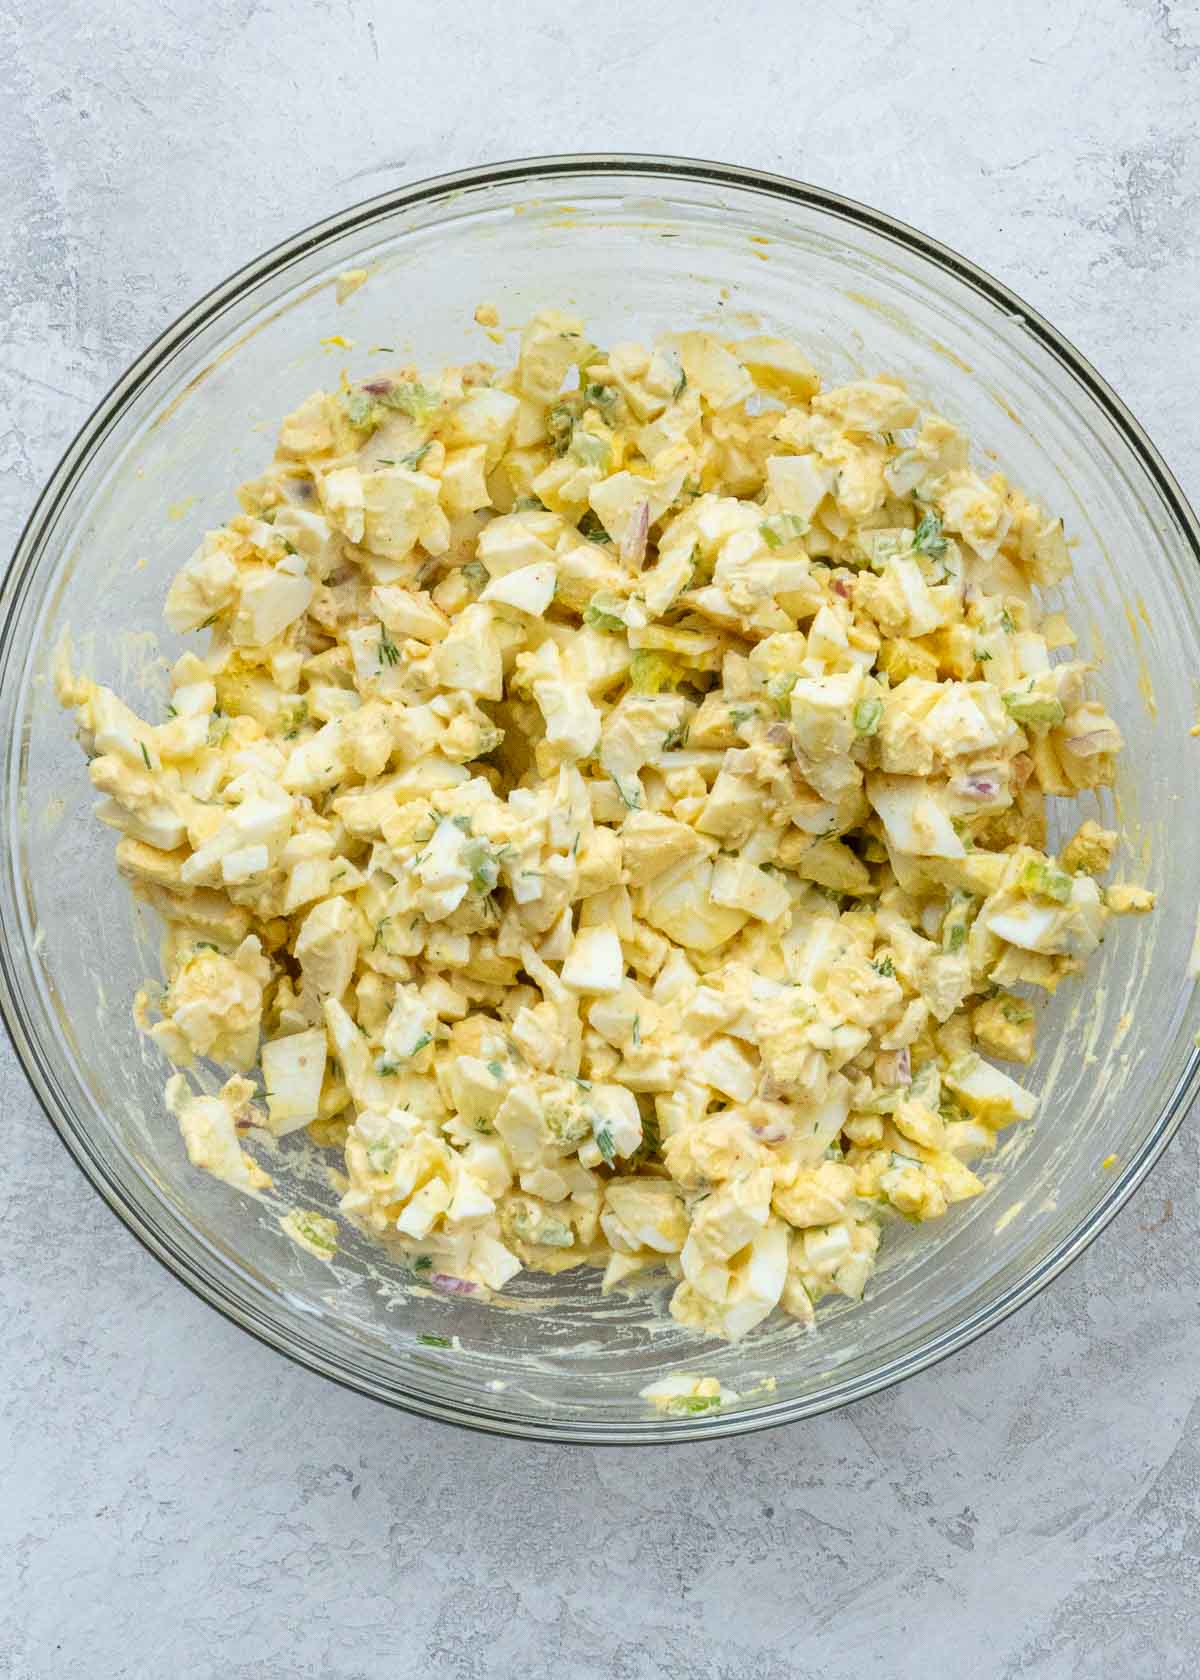 This easy step-by-step guide will teach you how to make egg salad that is loaded with flavor! This is a quick and easy recipe that is perfect for lunch!